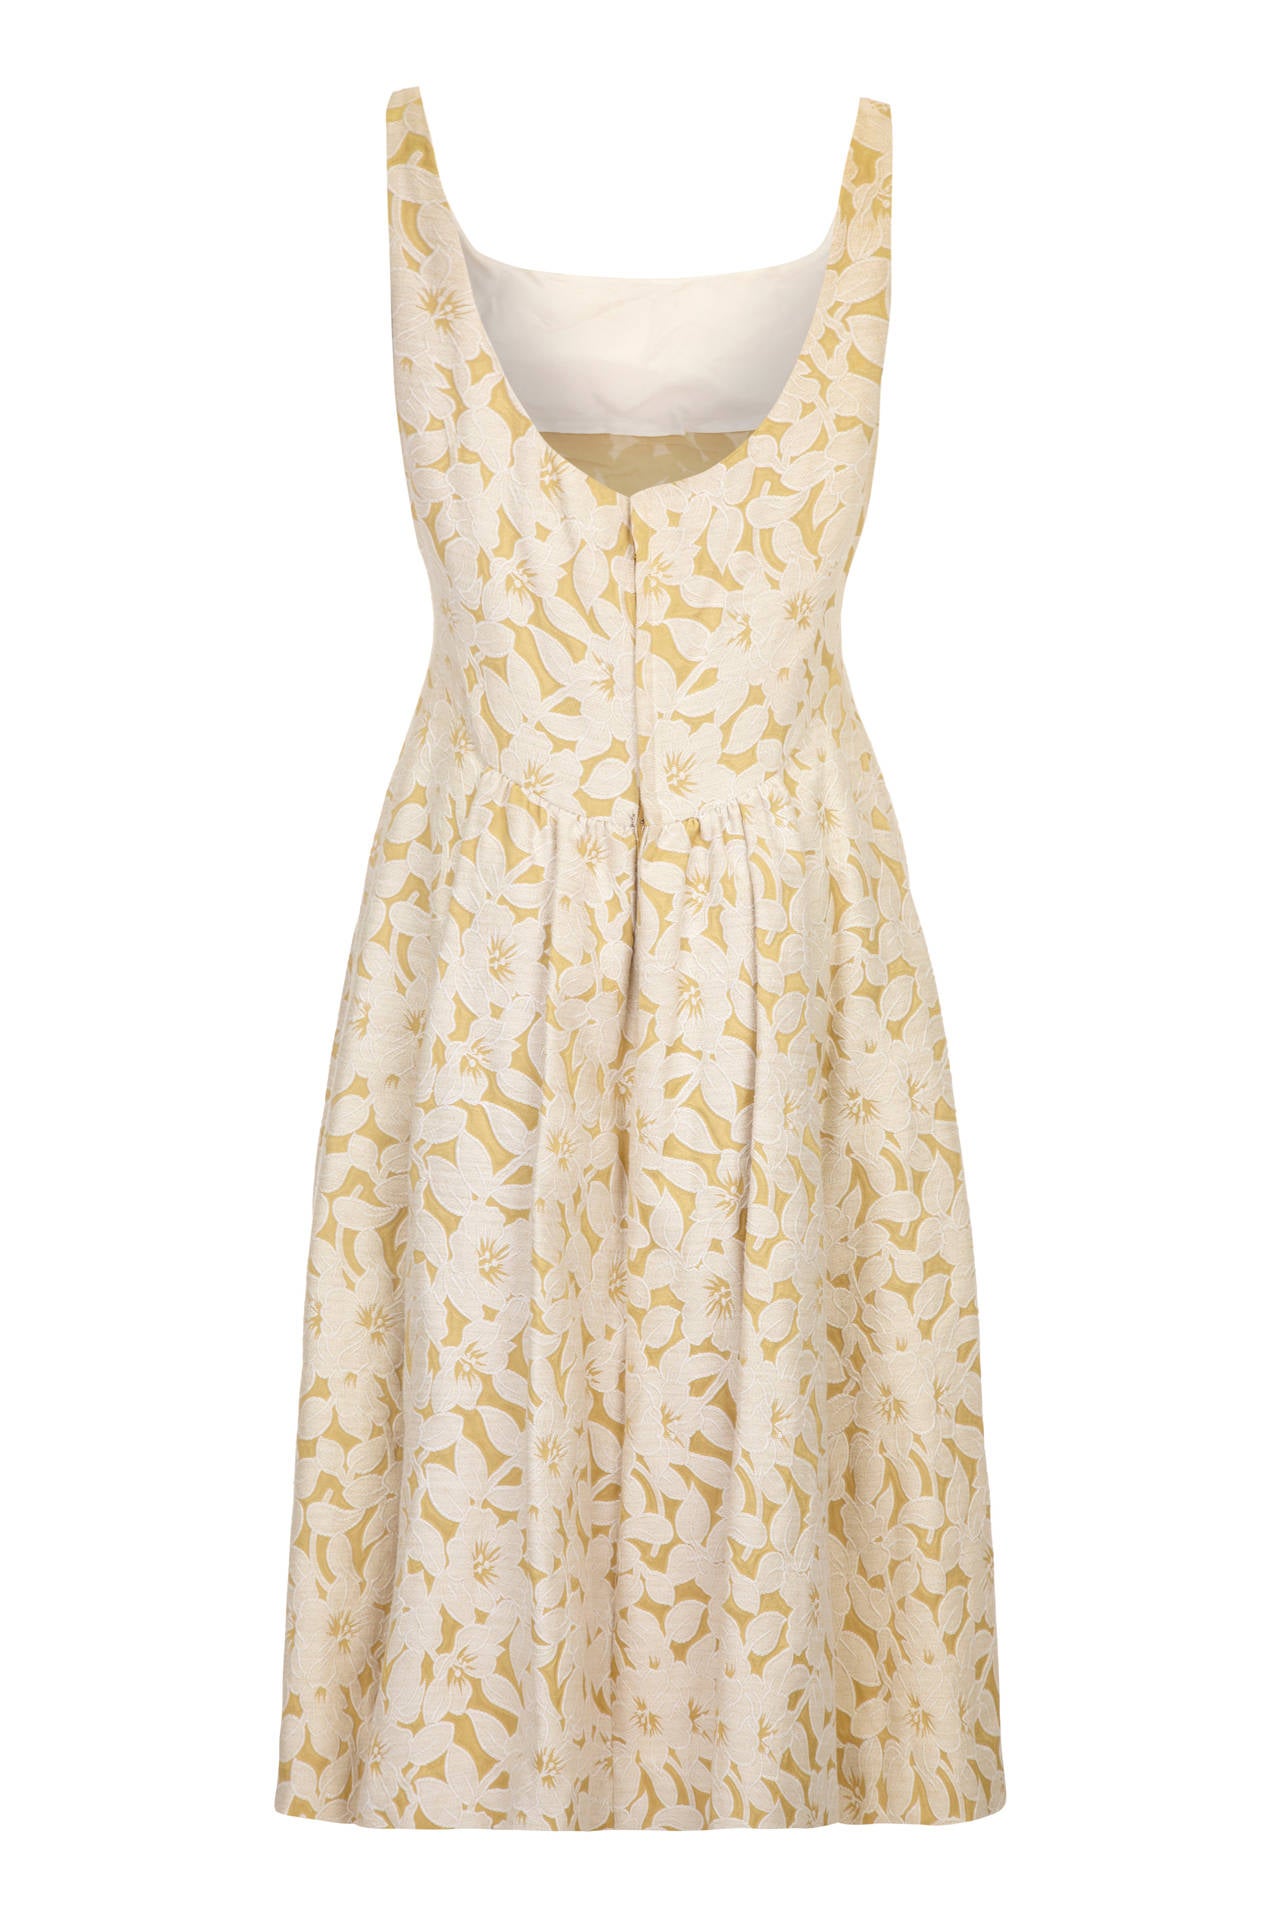 Gorgeous 1950s sleeveless, calf length dress in the softest gold and cream floral brocade by design label Rappi.  It features a low scoop at the back with gathers at the waist.  It is lined in organza, fastens at the back with a zip and is in